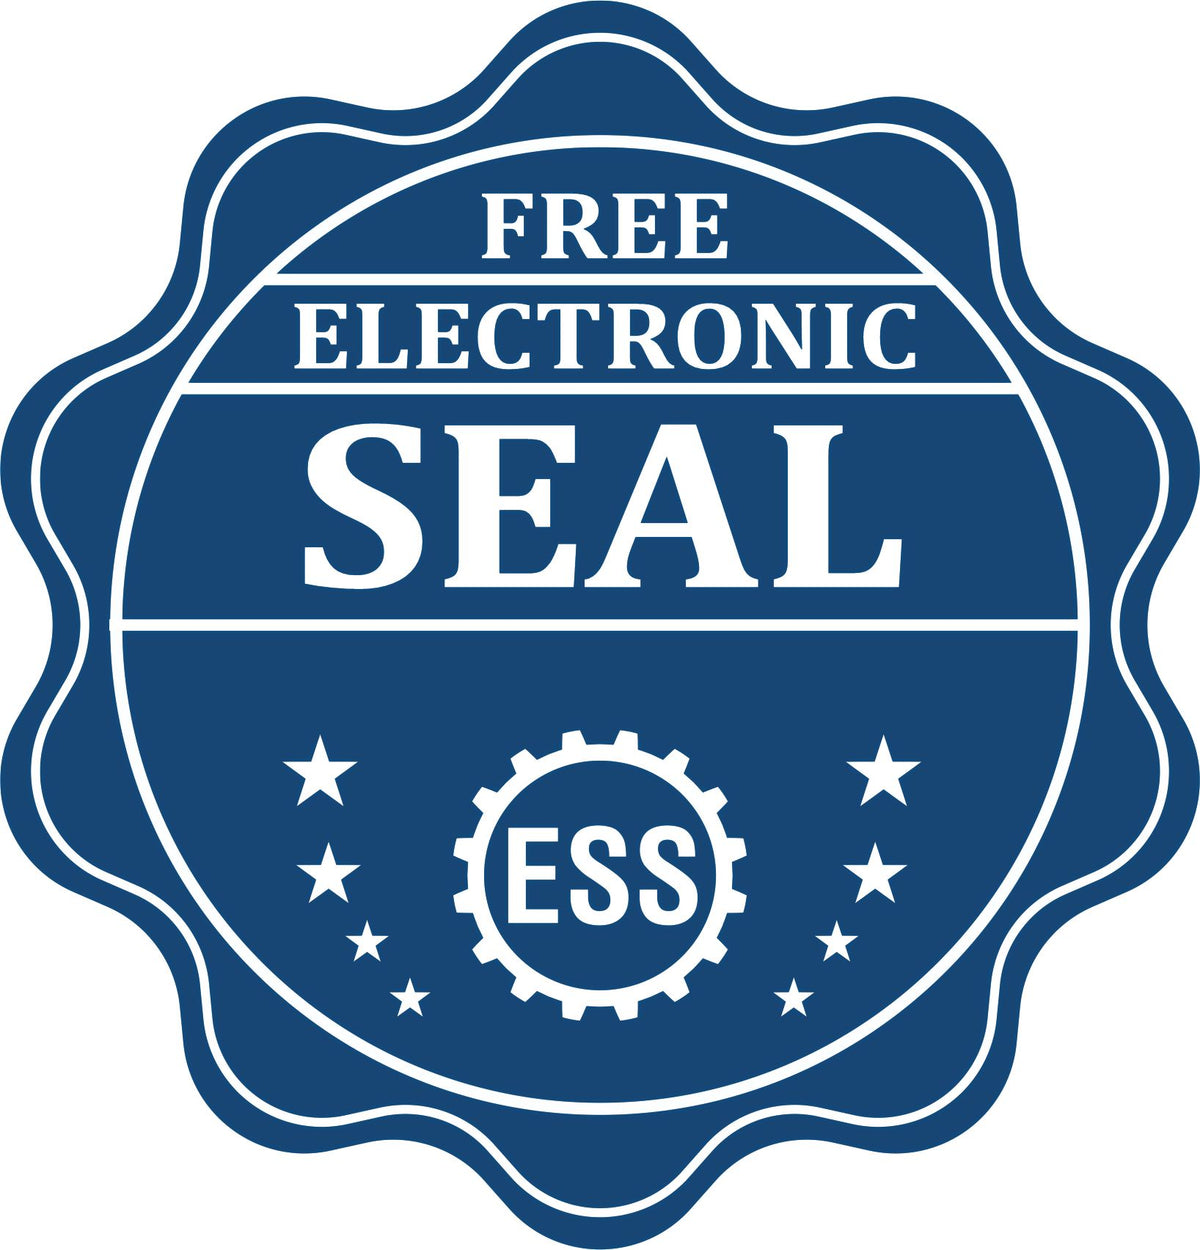 A badge showing a free electronic seal for the Hybrid West Virginia Landscape Architect Seal with stars and the ESS gear on the emblem.